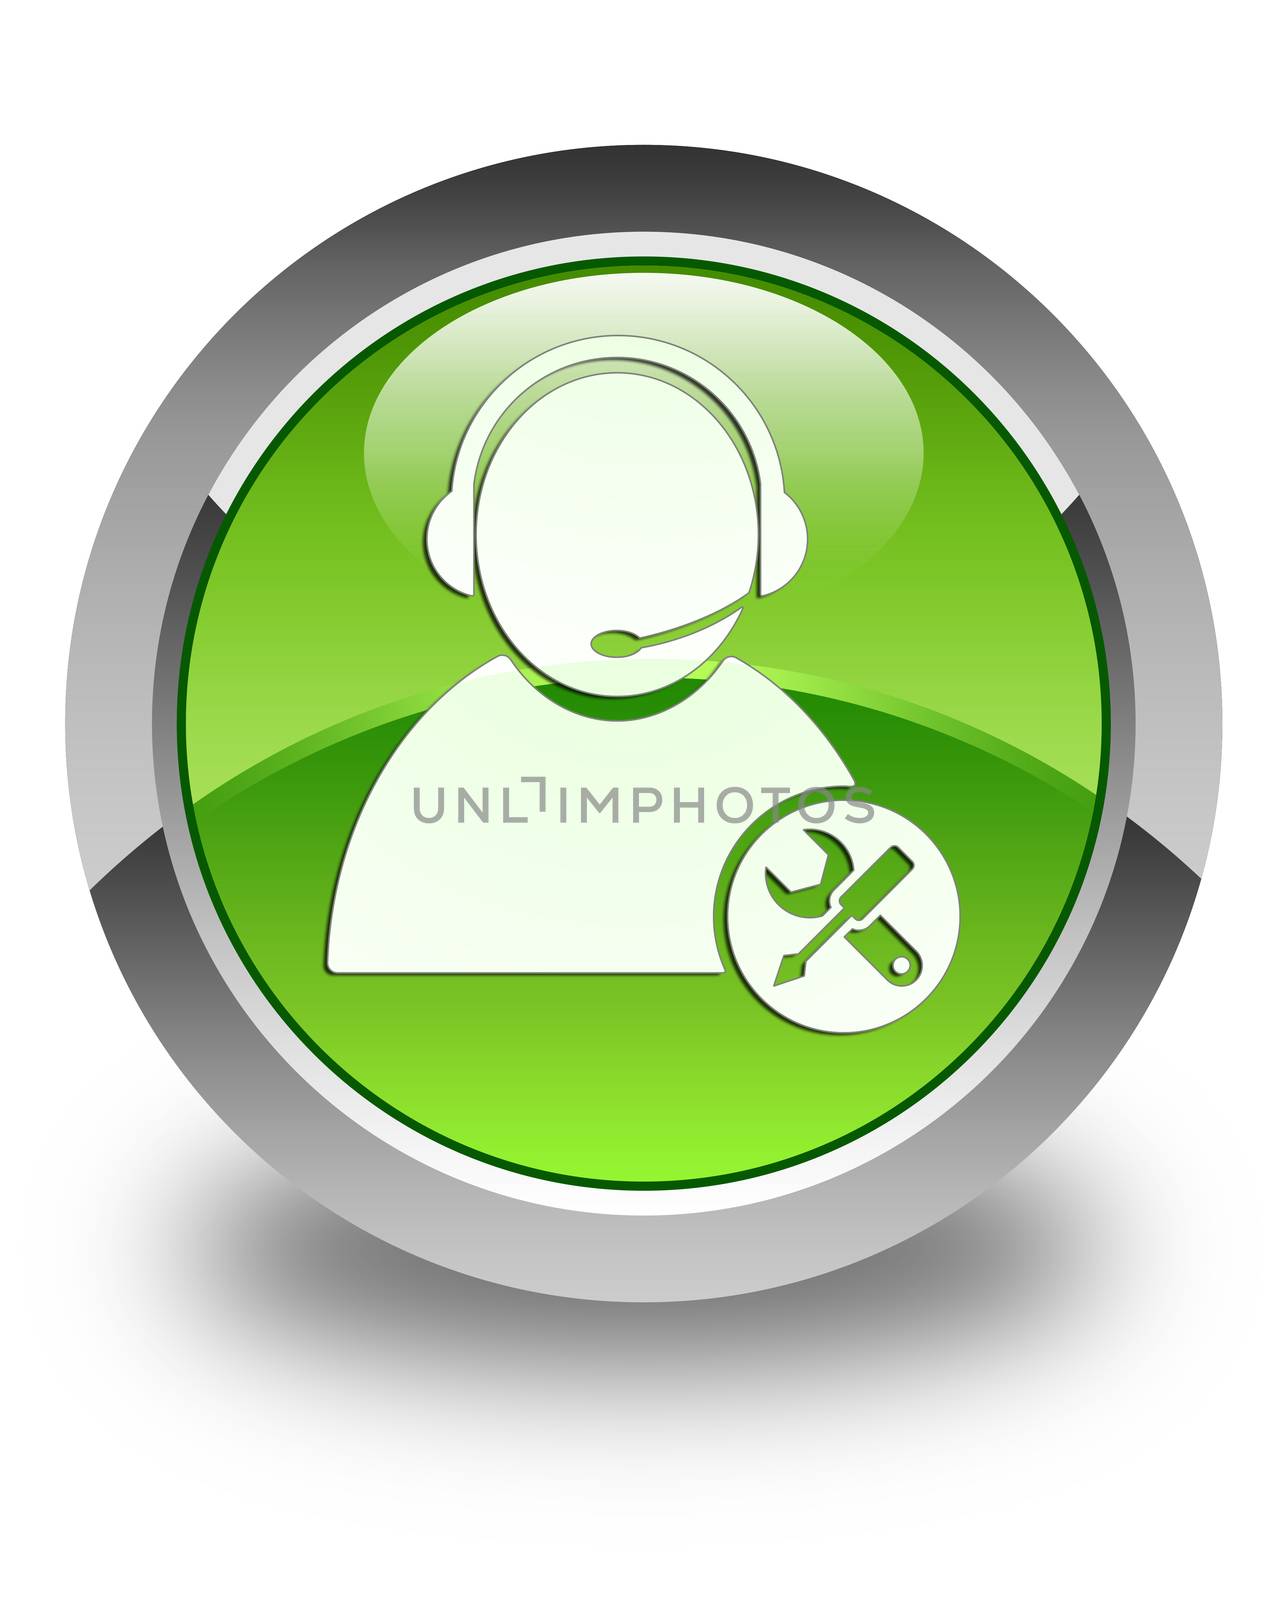 Tech support icon glossy green round button